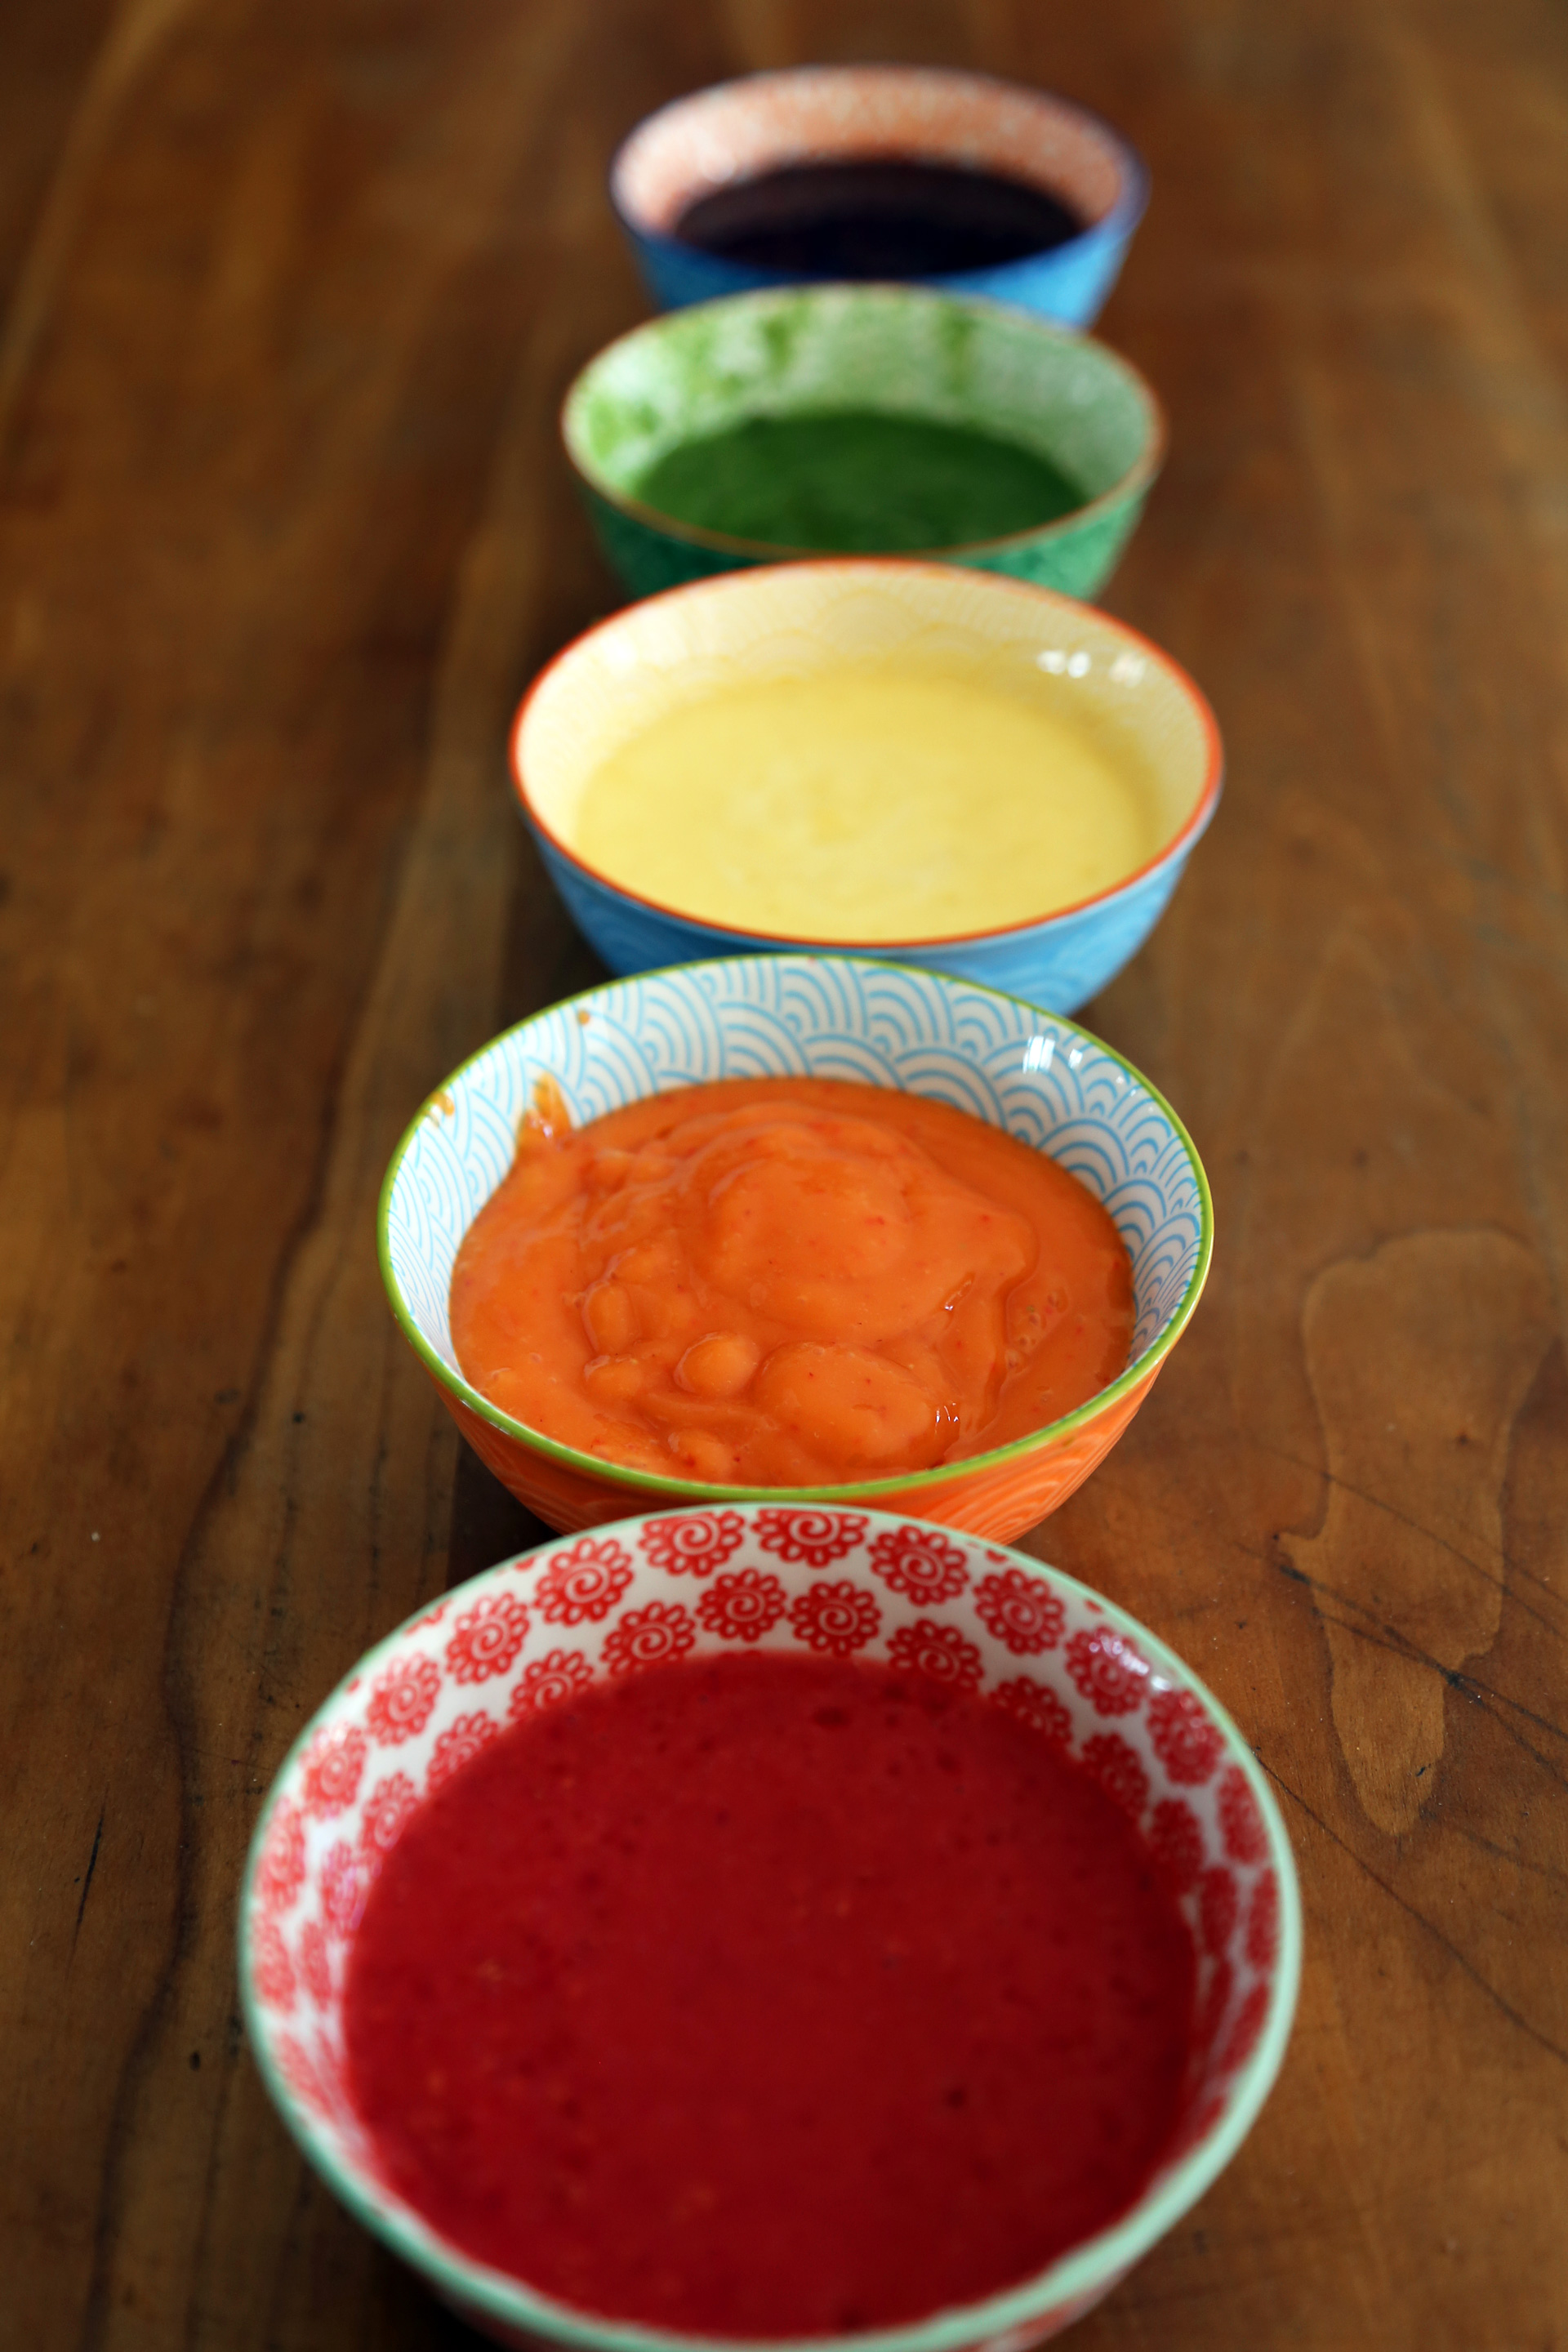 Pour each layer of fresh fruity puree into a small bowl.